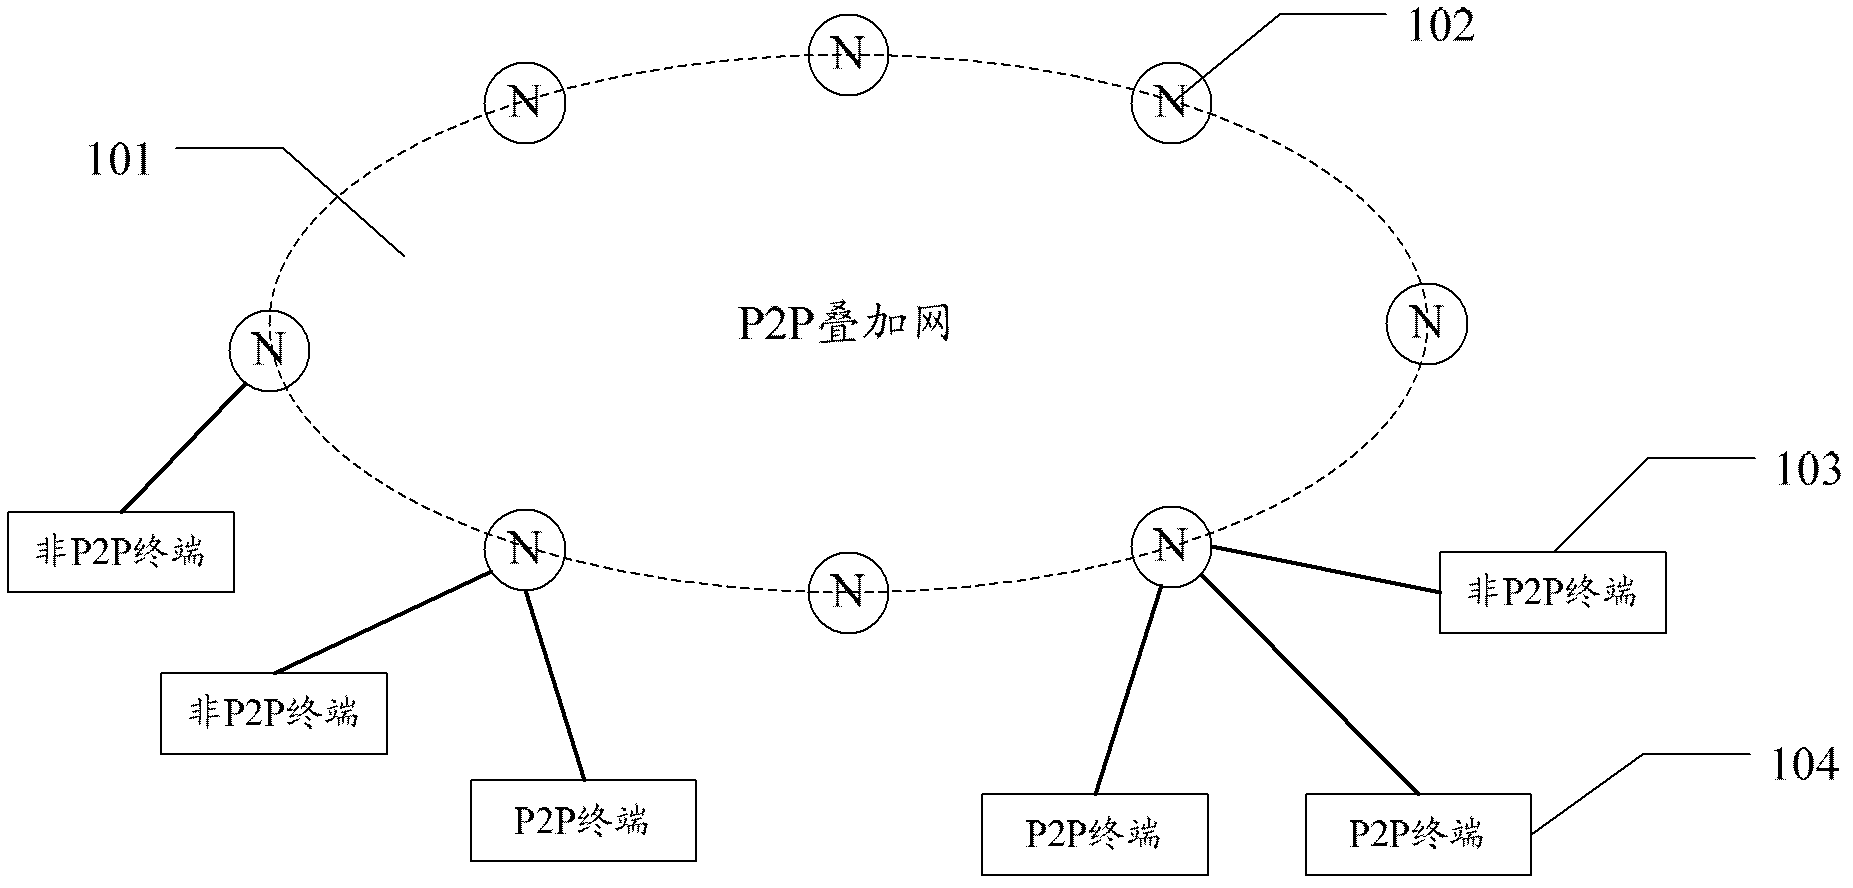 Restorative method of routing table in peer-to-peer (P2P) overlay network and P2P overlay network nodes